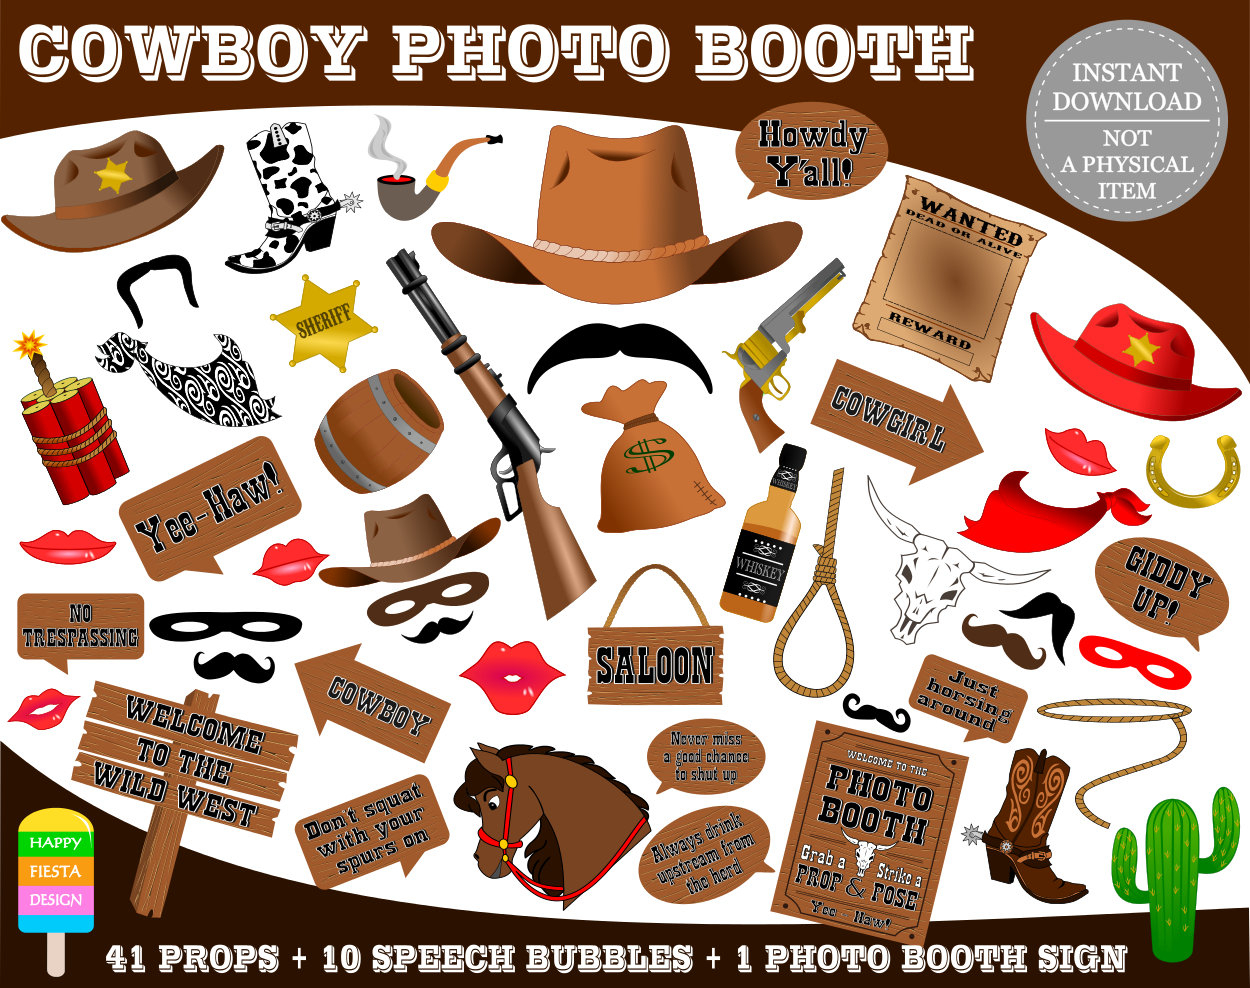 Printable Cowboy Photo Booth Propsphoto Booth Sign-Wild West | Etsy - Free Printable Western Photo Props